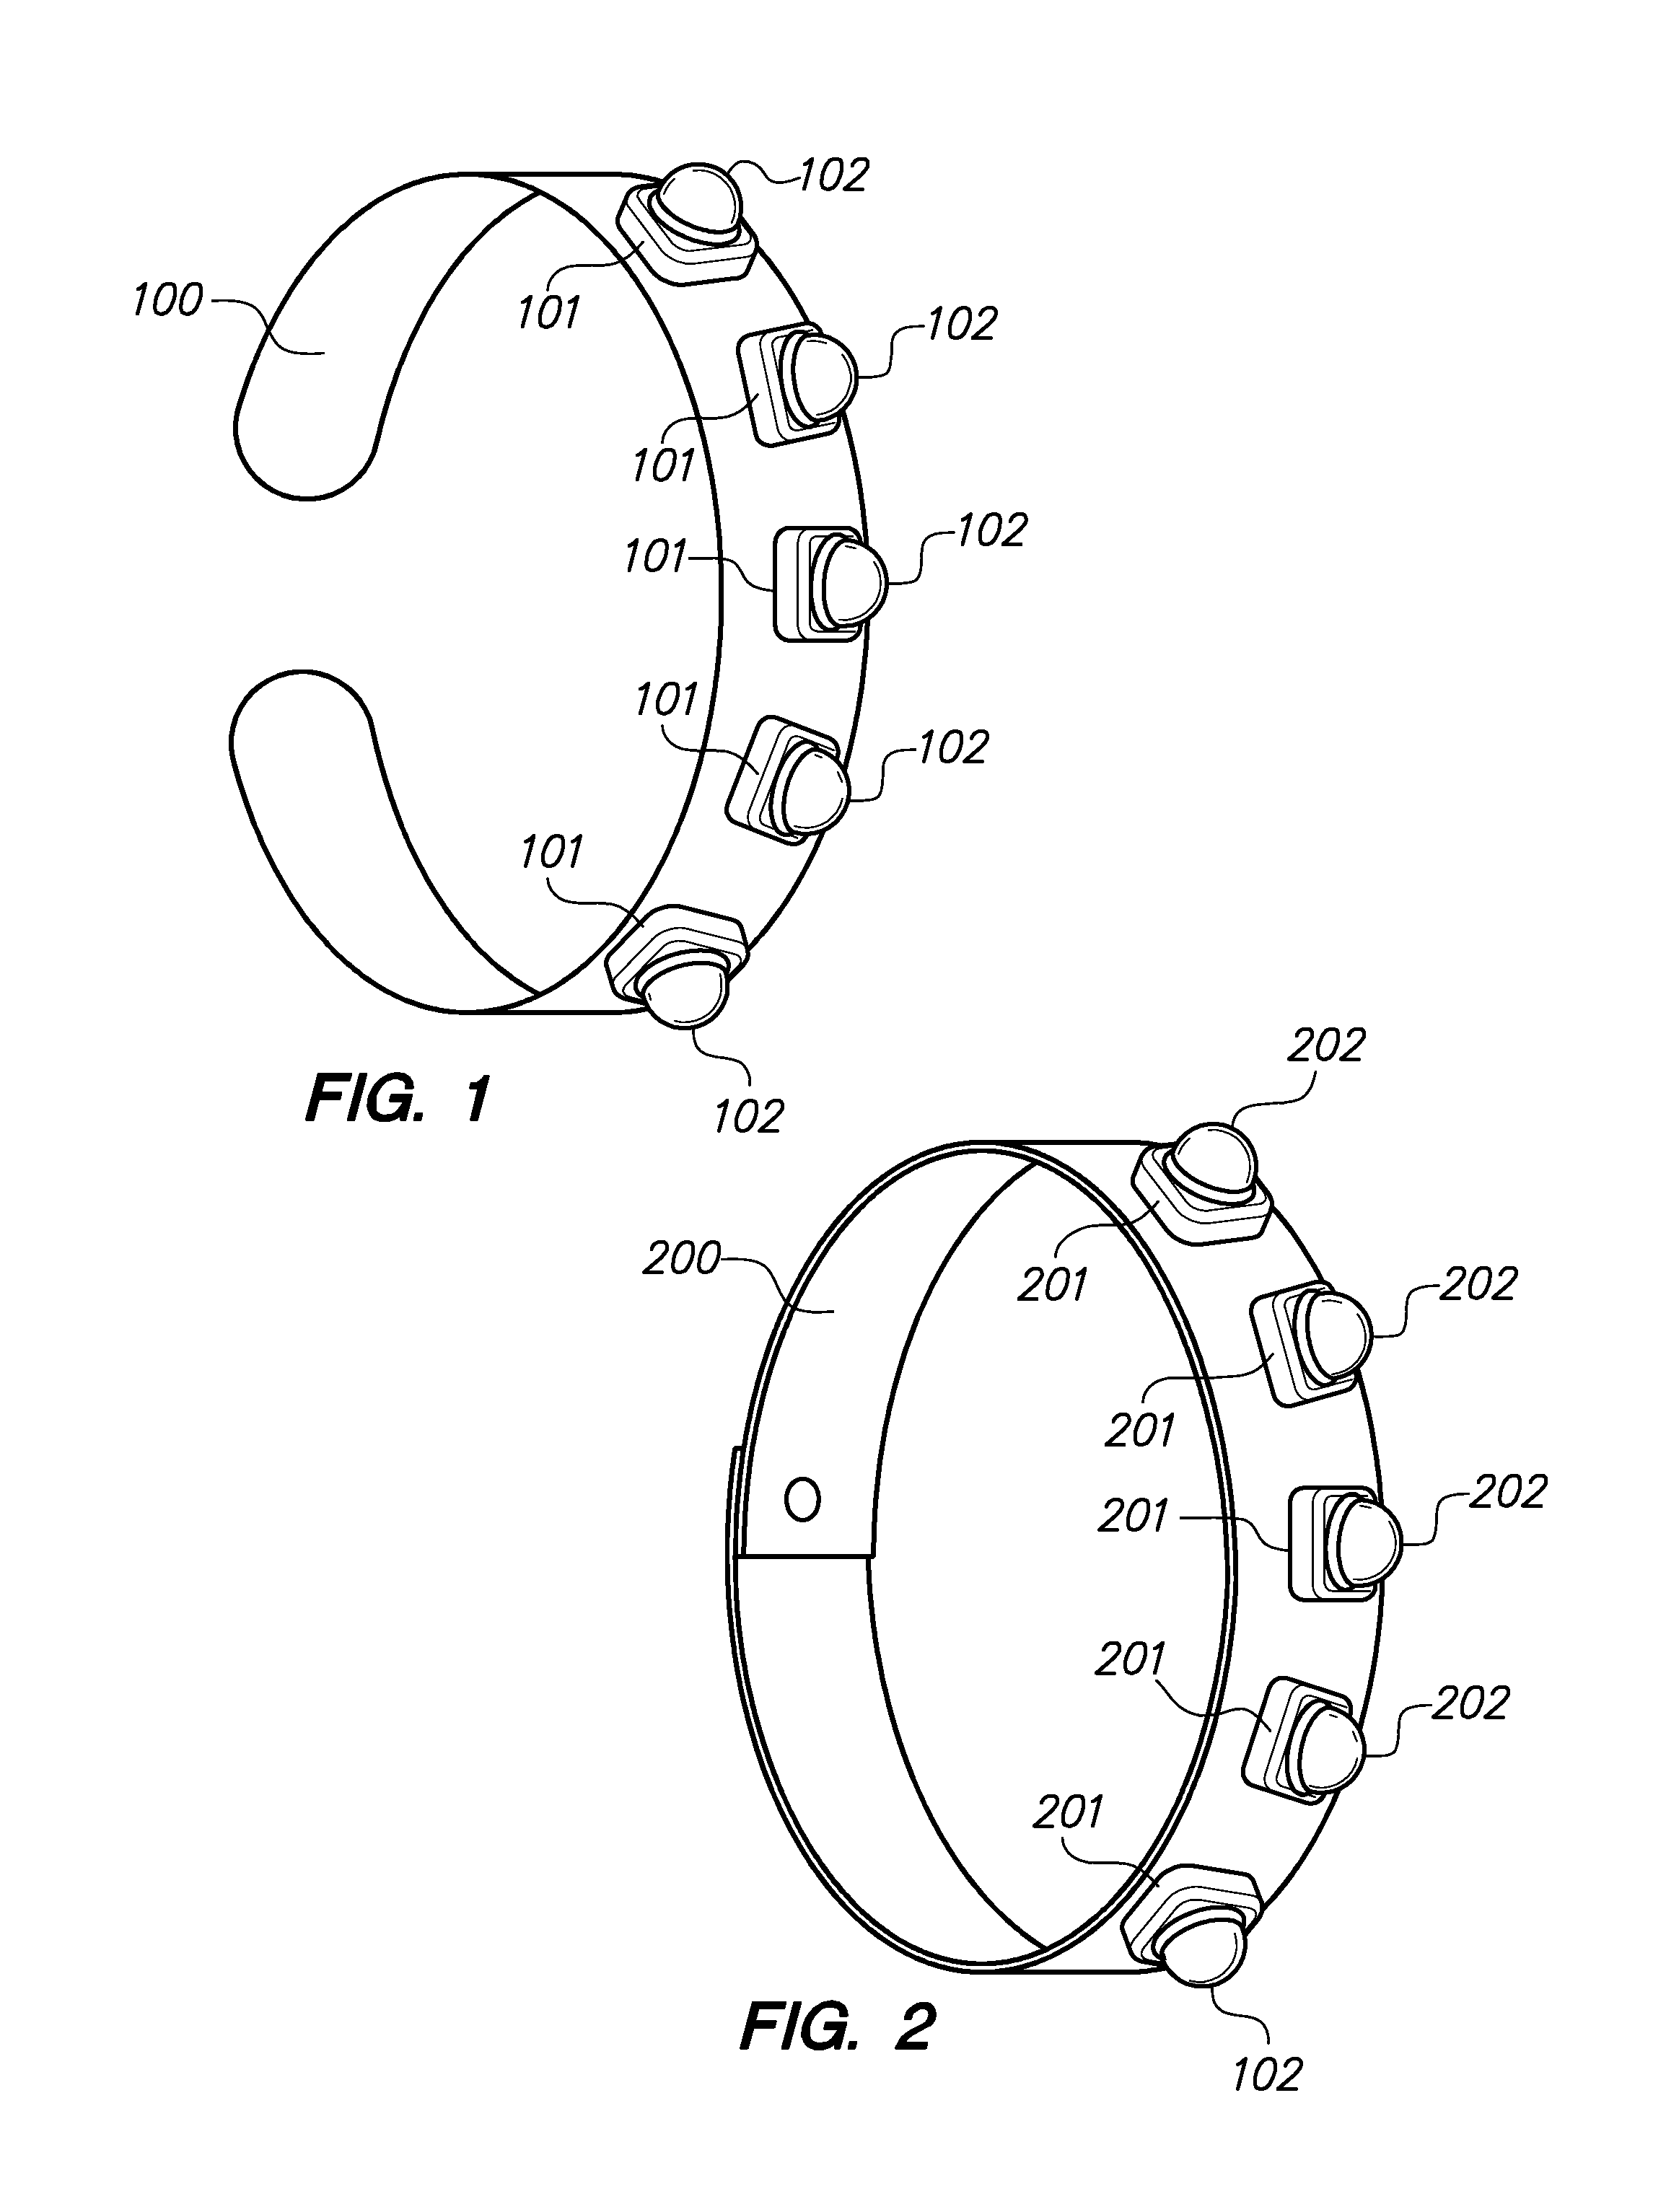 Apparatus Comprising Removable Light Source for Decorative Utility